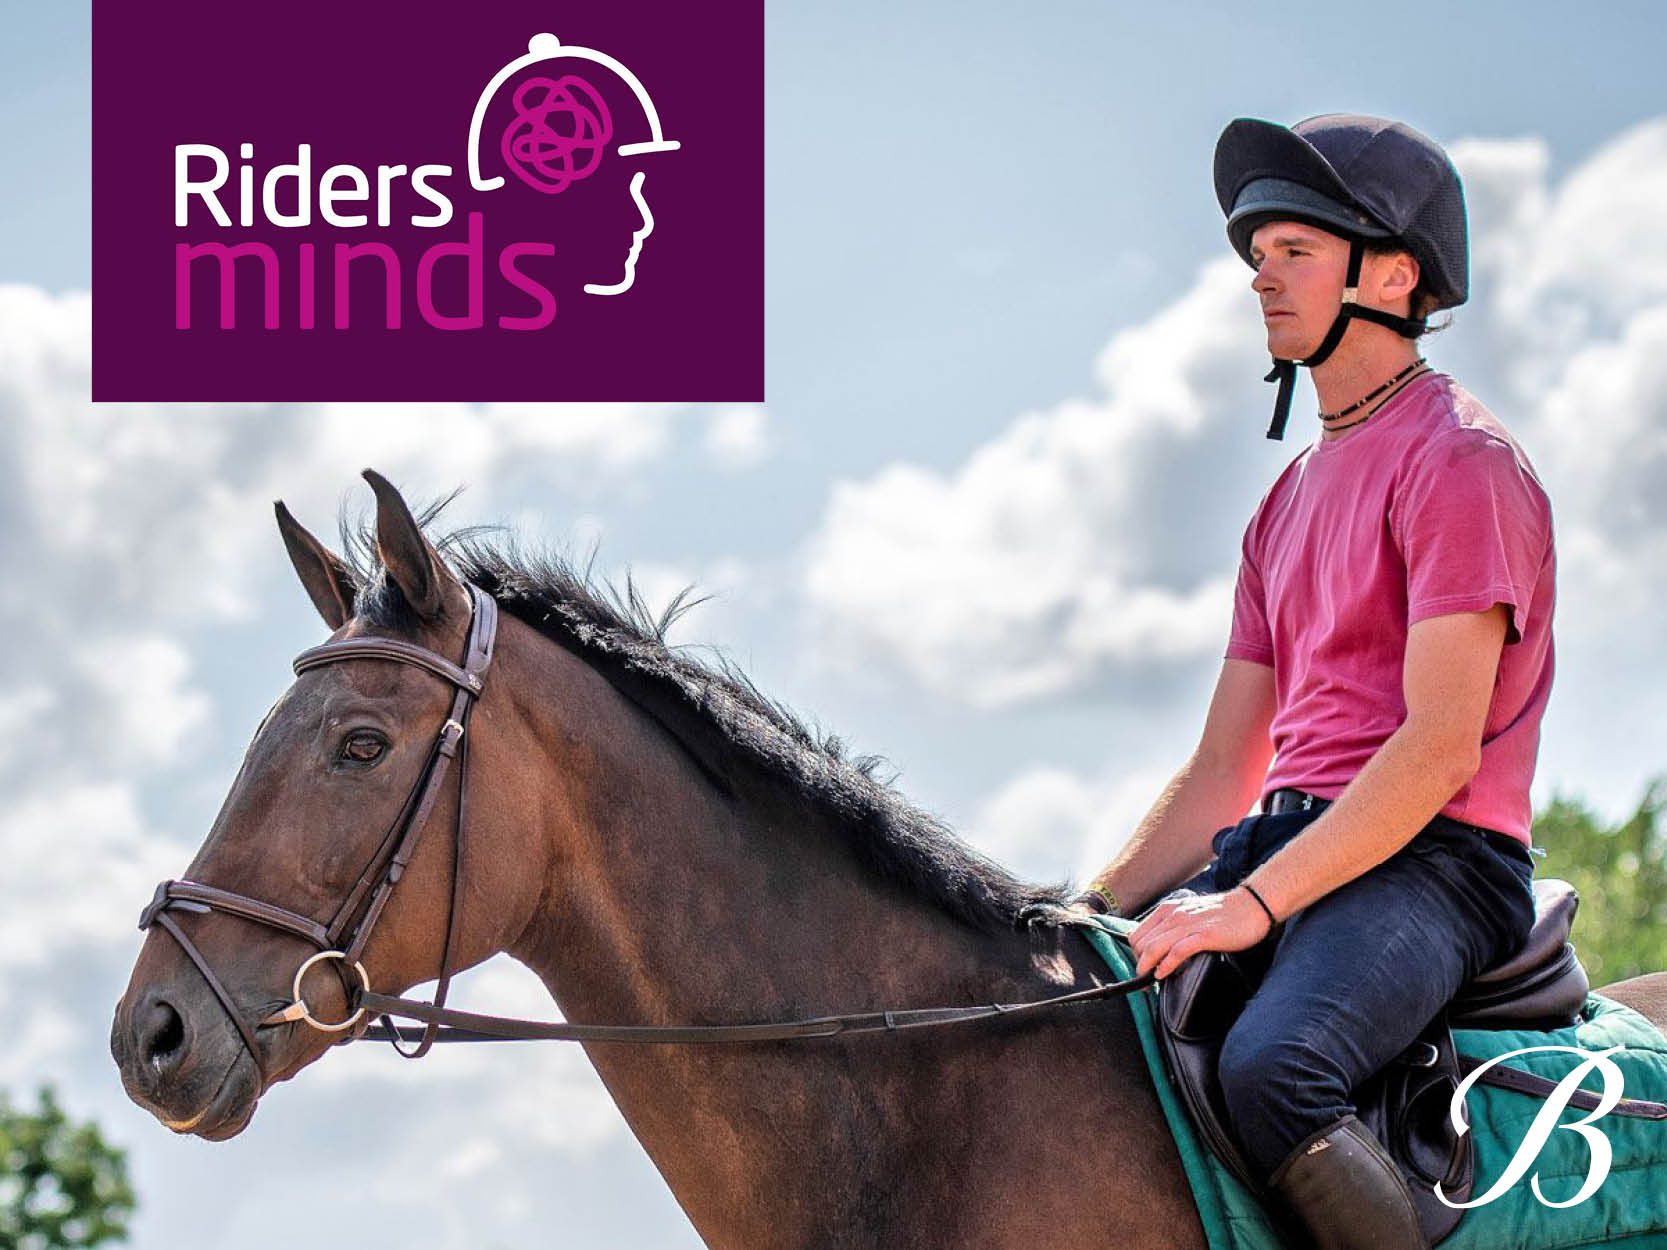 Bates Saddles continues to support the Riders Minds initiative